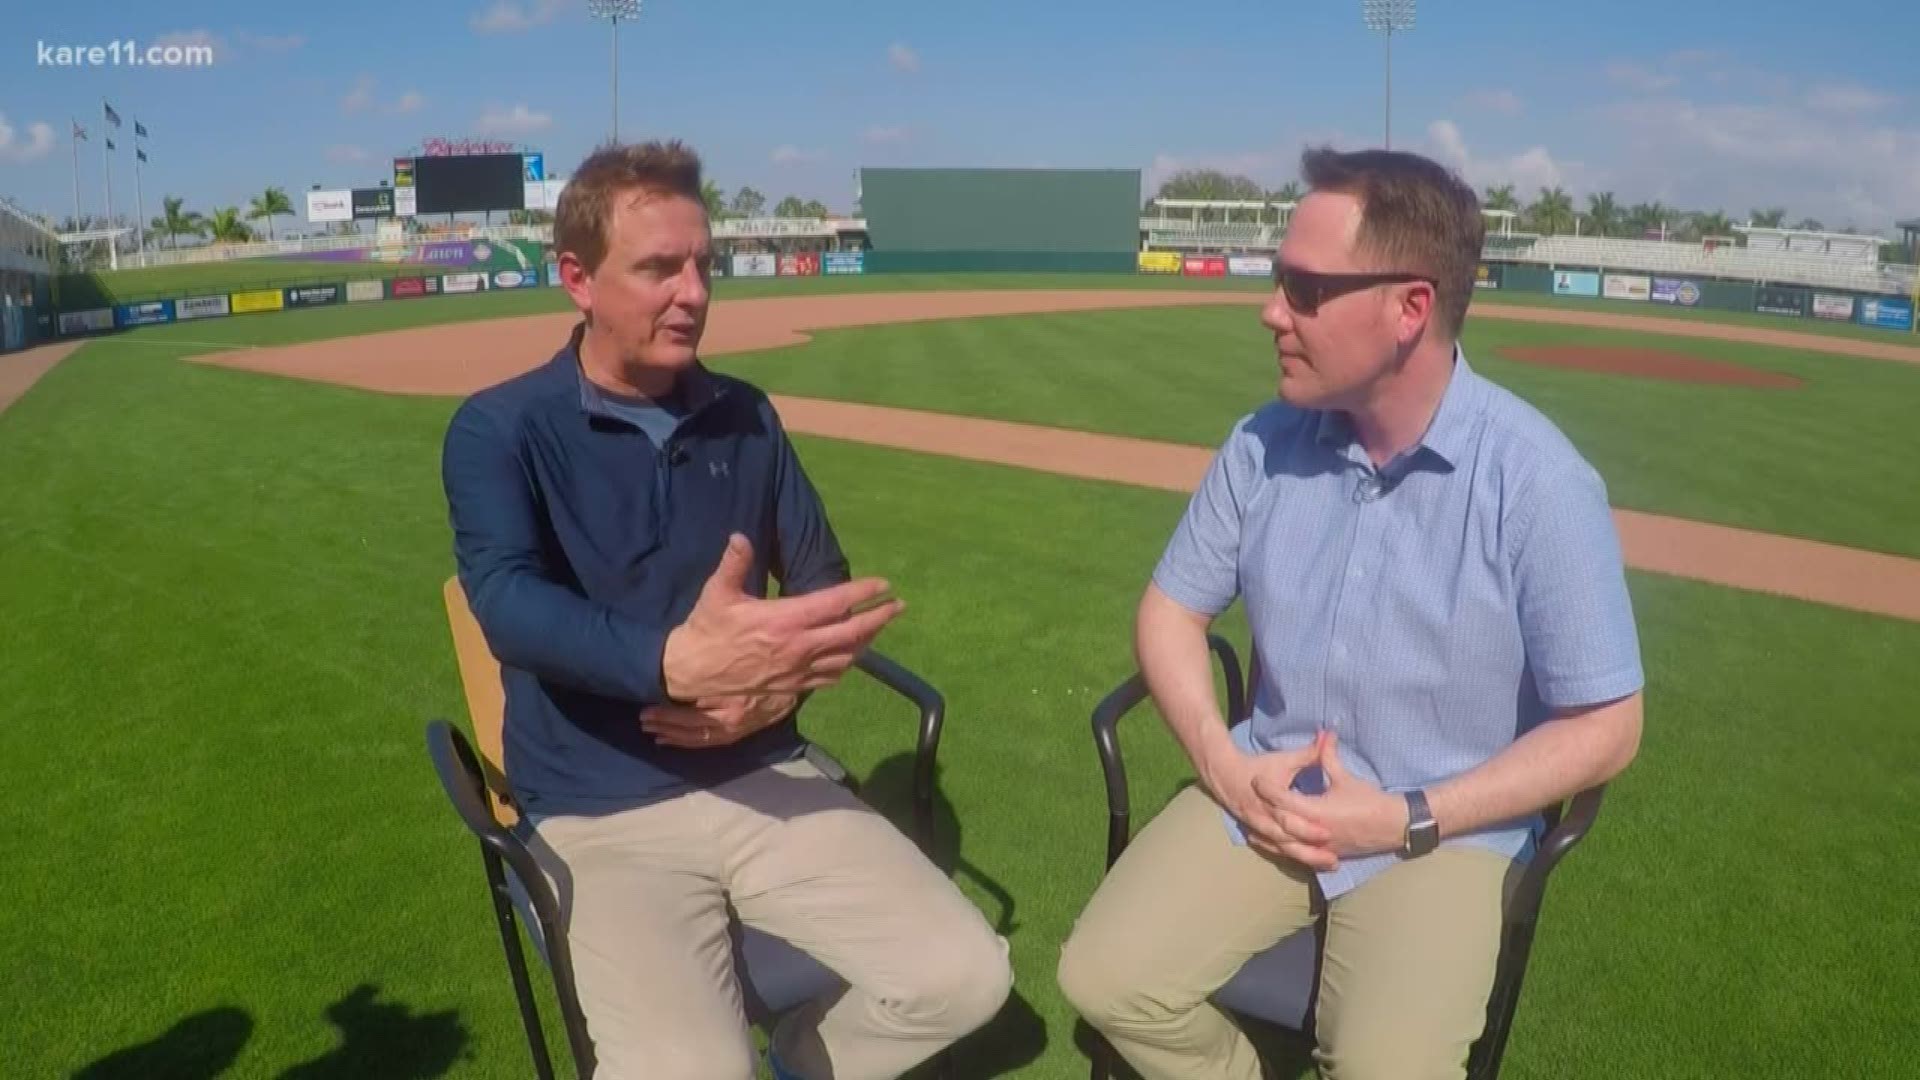 I drew the long straw spring training, always a fun assignment. Partly because the Twins always have a healthy optimism.

This year with a new skipper there's definitely a reset.

I caught up with the main man in charge Chief Baseball Officer Derek Falvey earlier today.